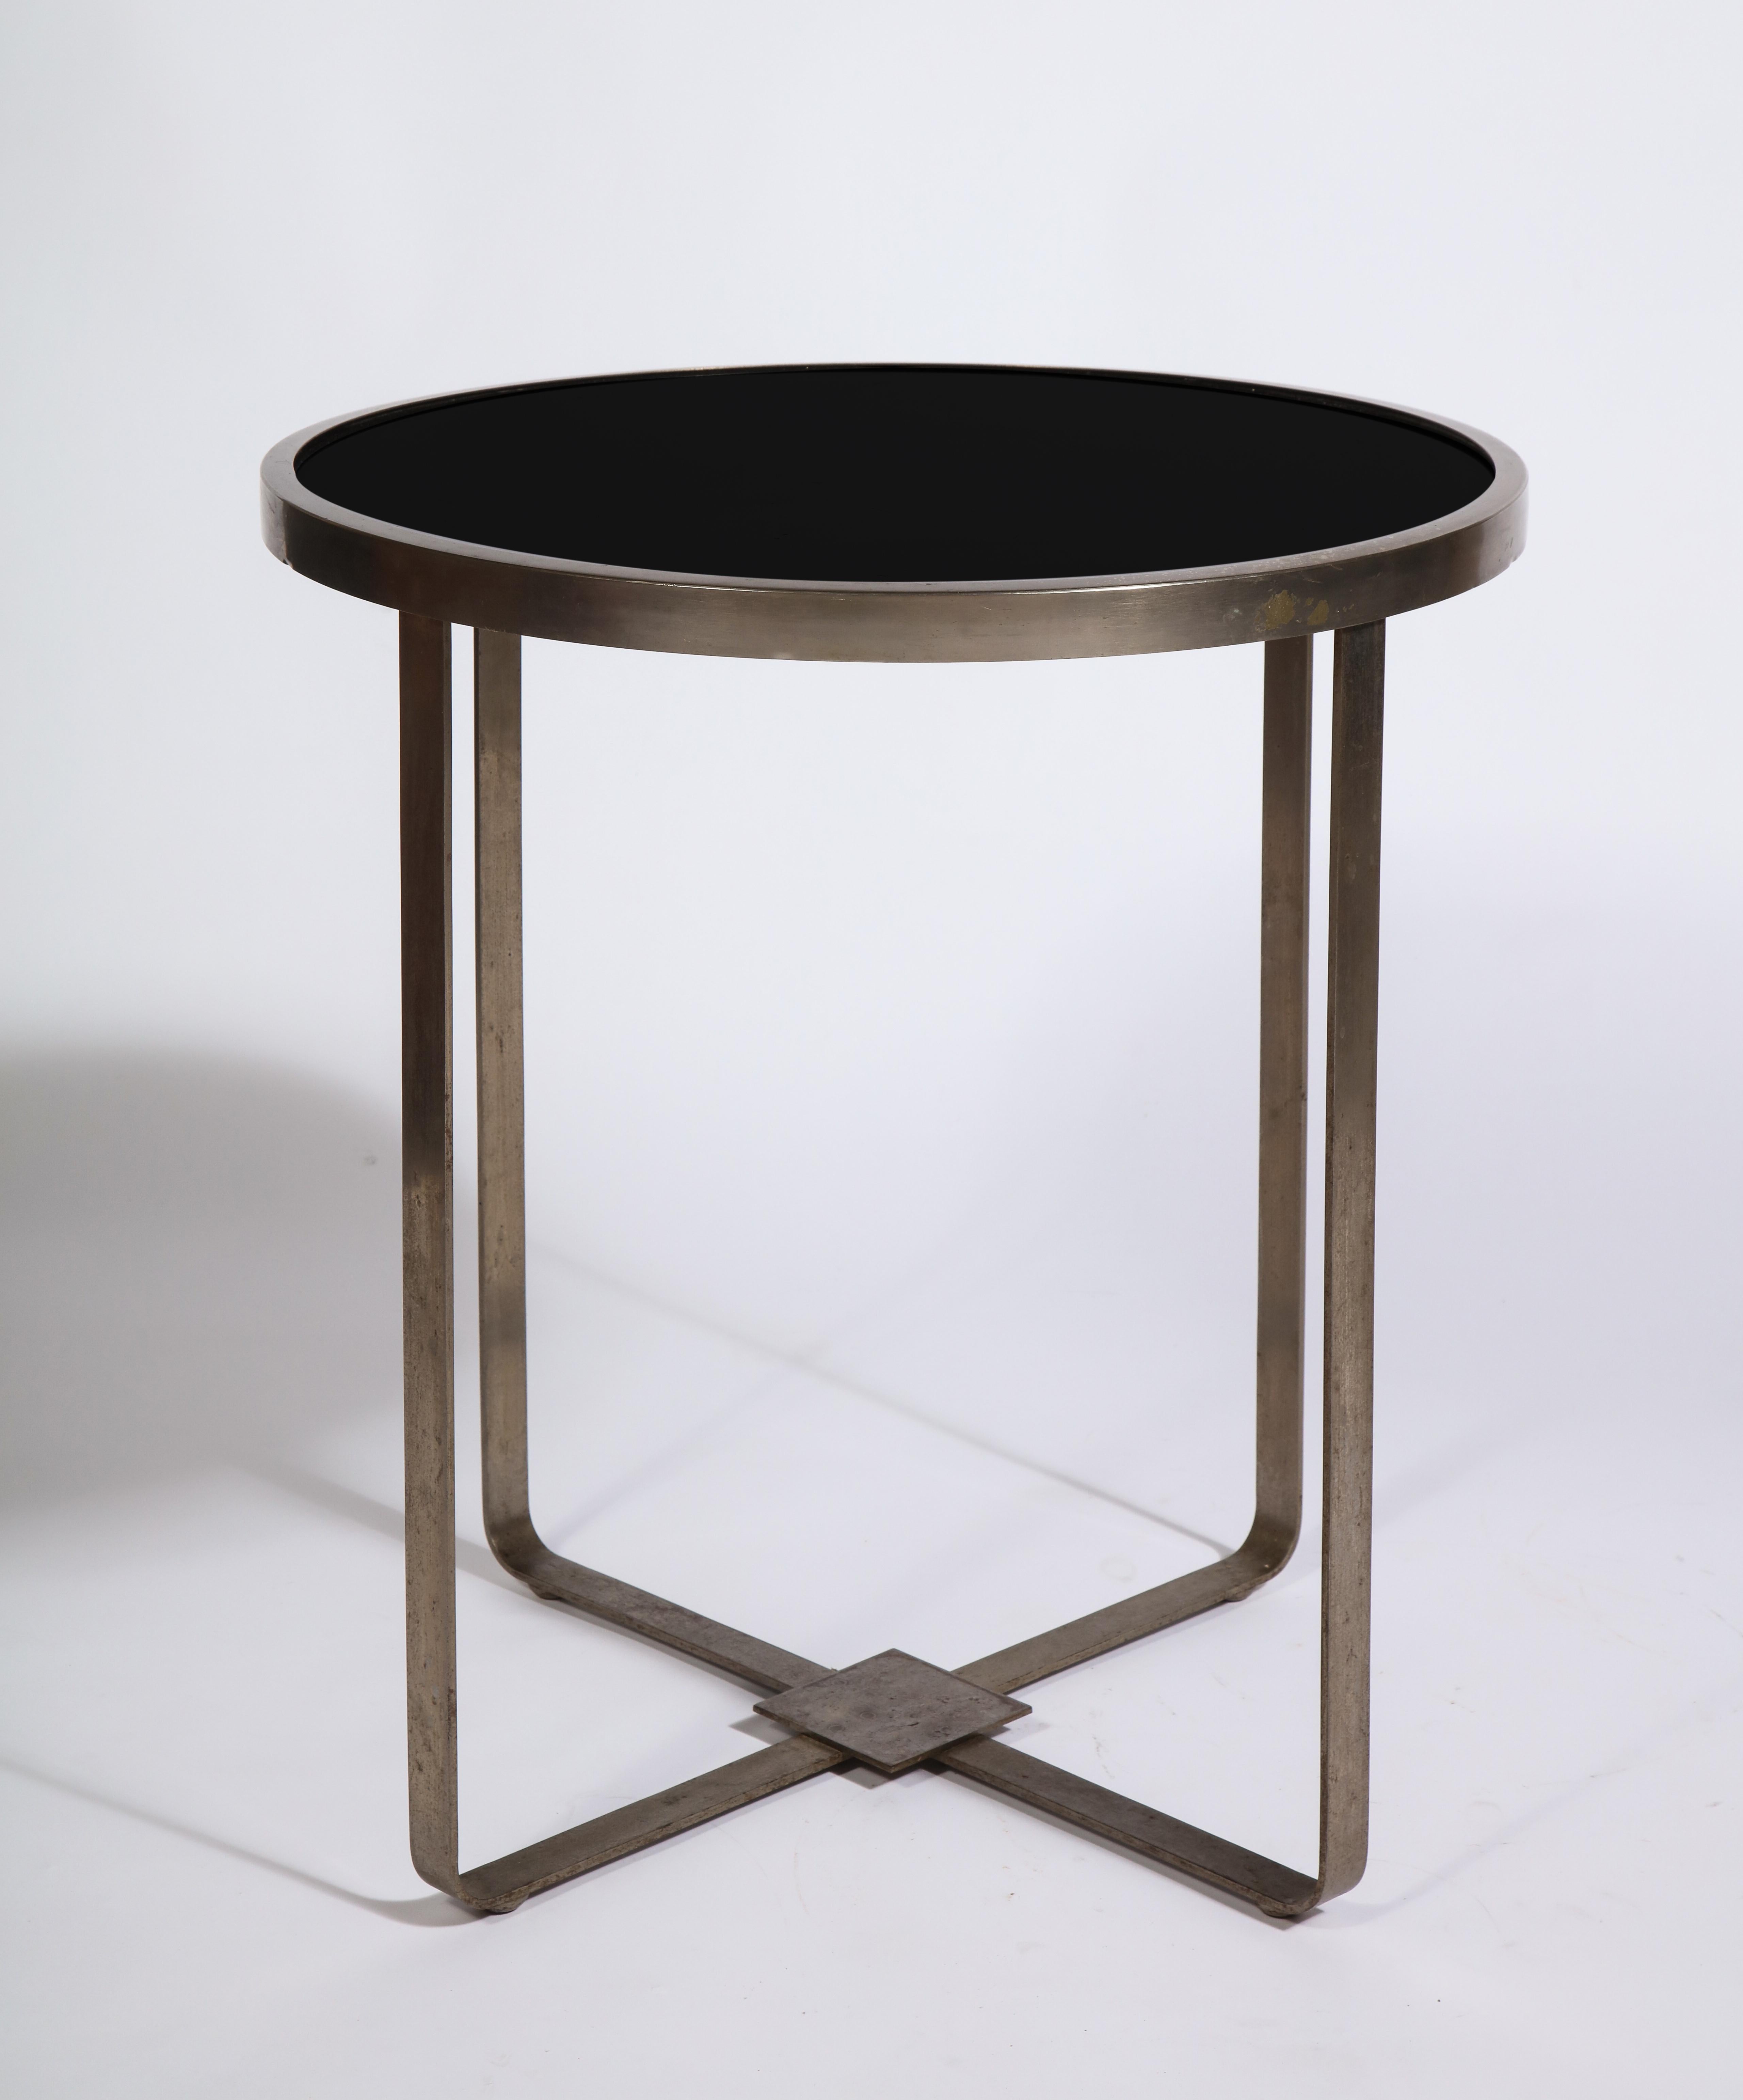 French Modernist Art Deco Adnet Attr. Steel Round Black Glass Table, France, 1930s For Sale